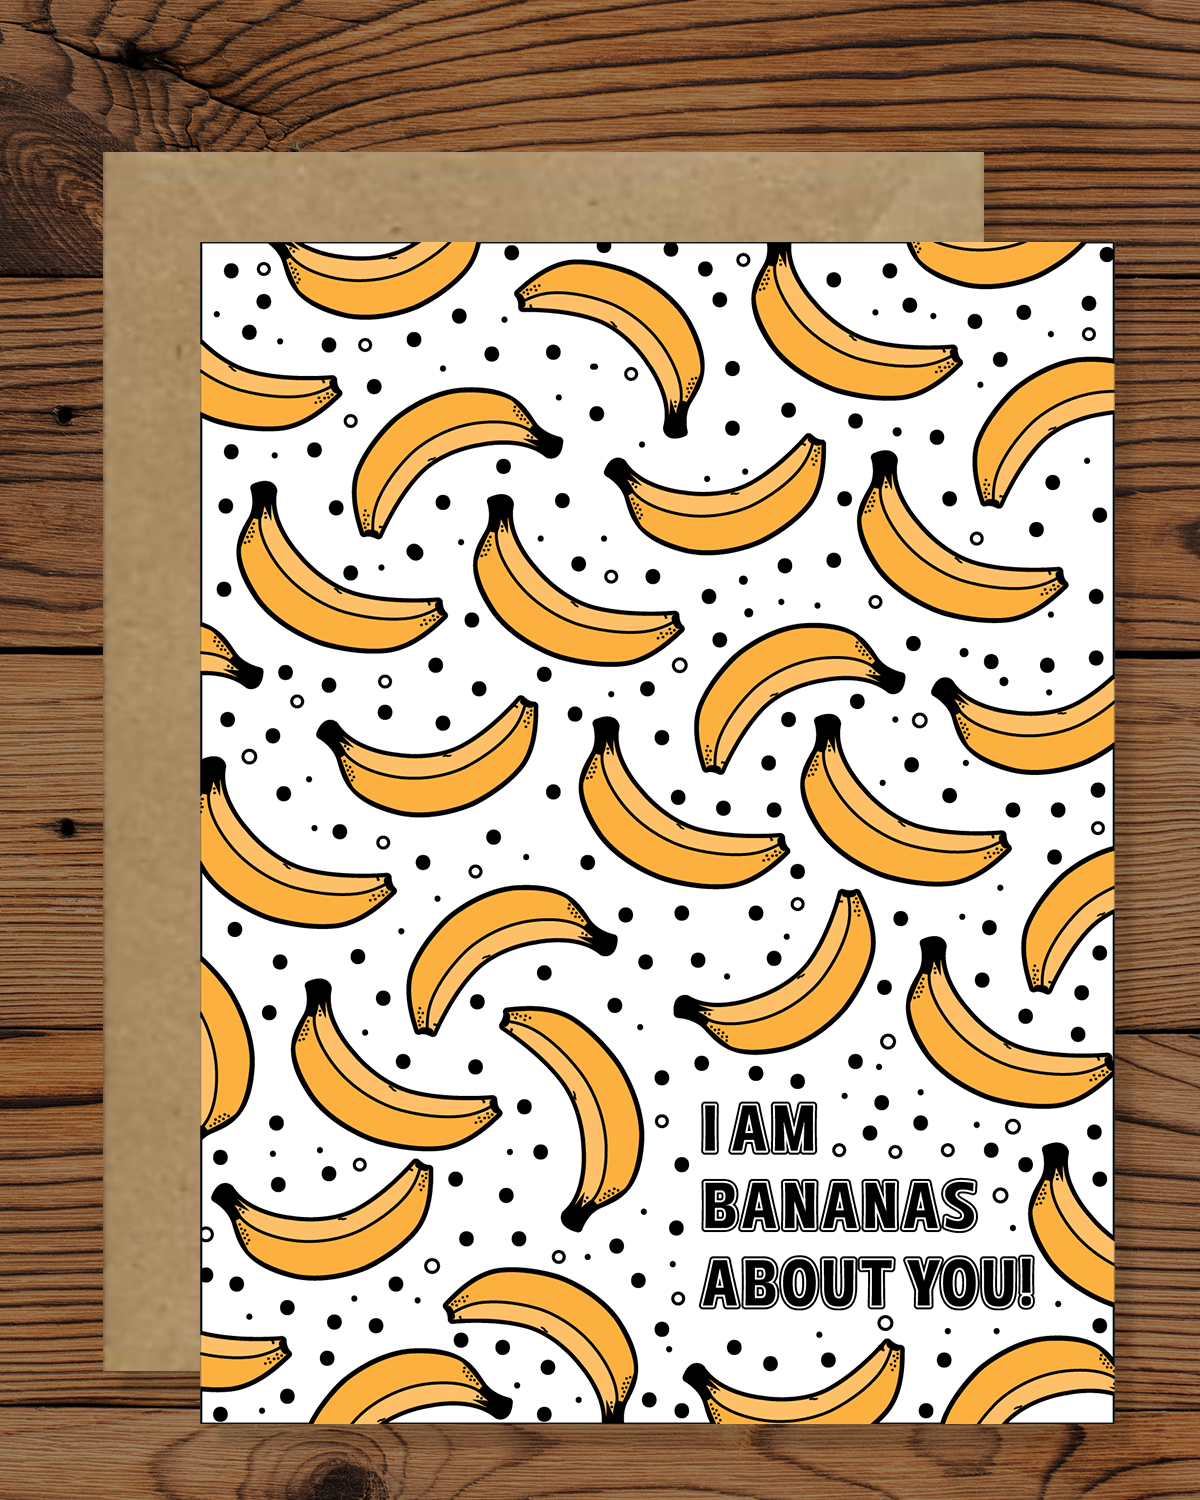 I am bananas about you greeting card